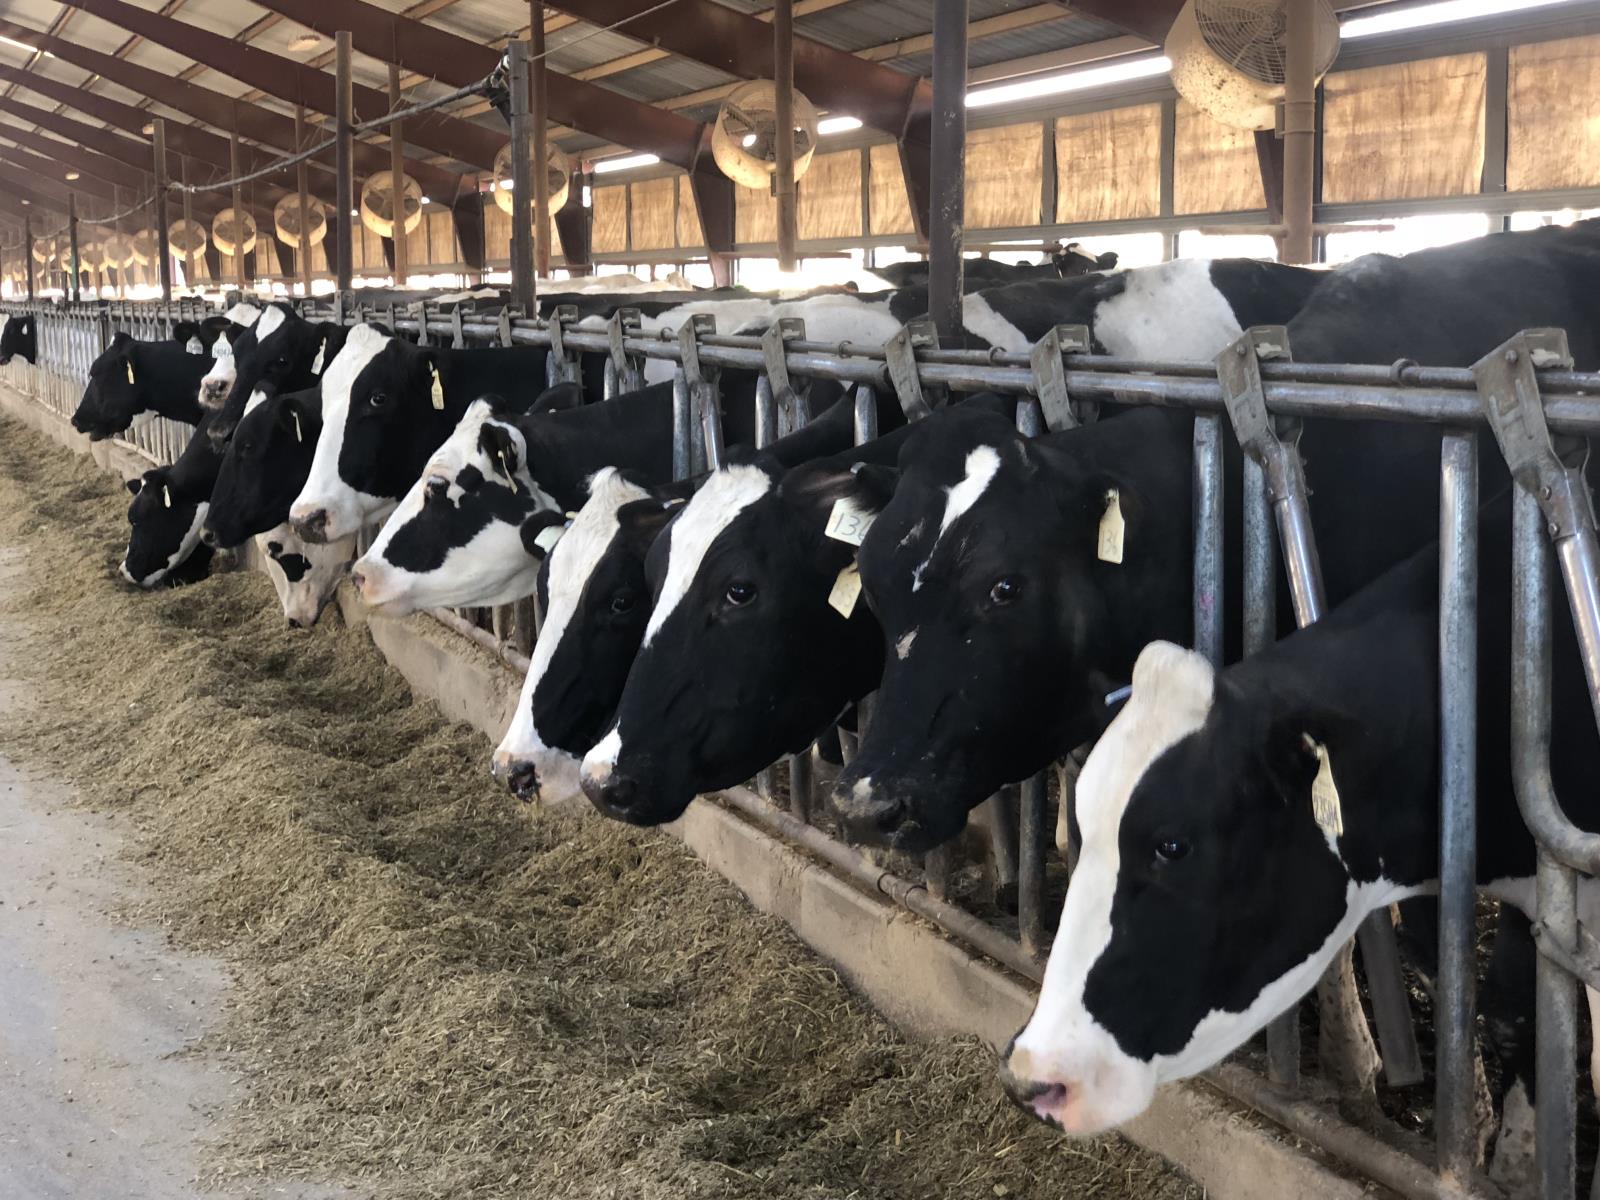 Idaho’s dairy operations, challenged by several years of depressed prices, has received several small bits of good news this year and a small ray of optimism has returned to the industry.